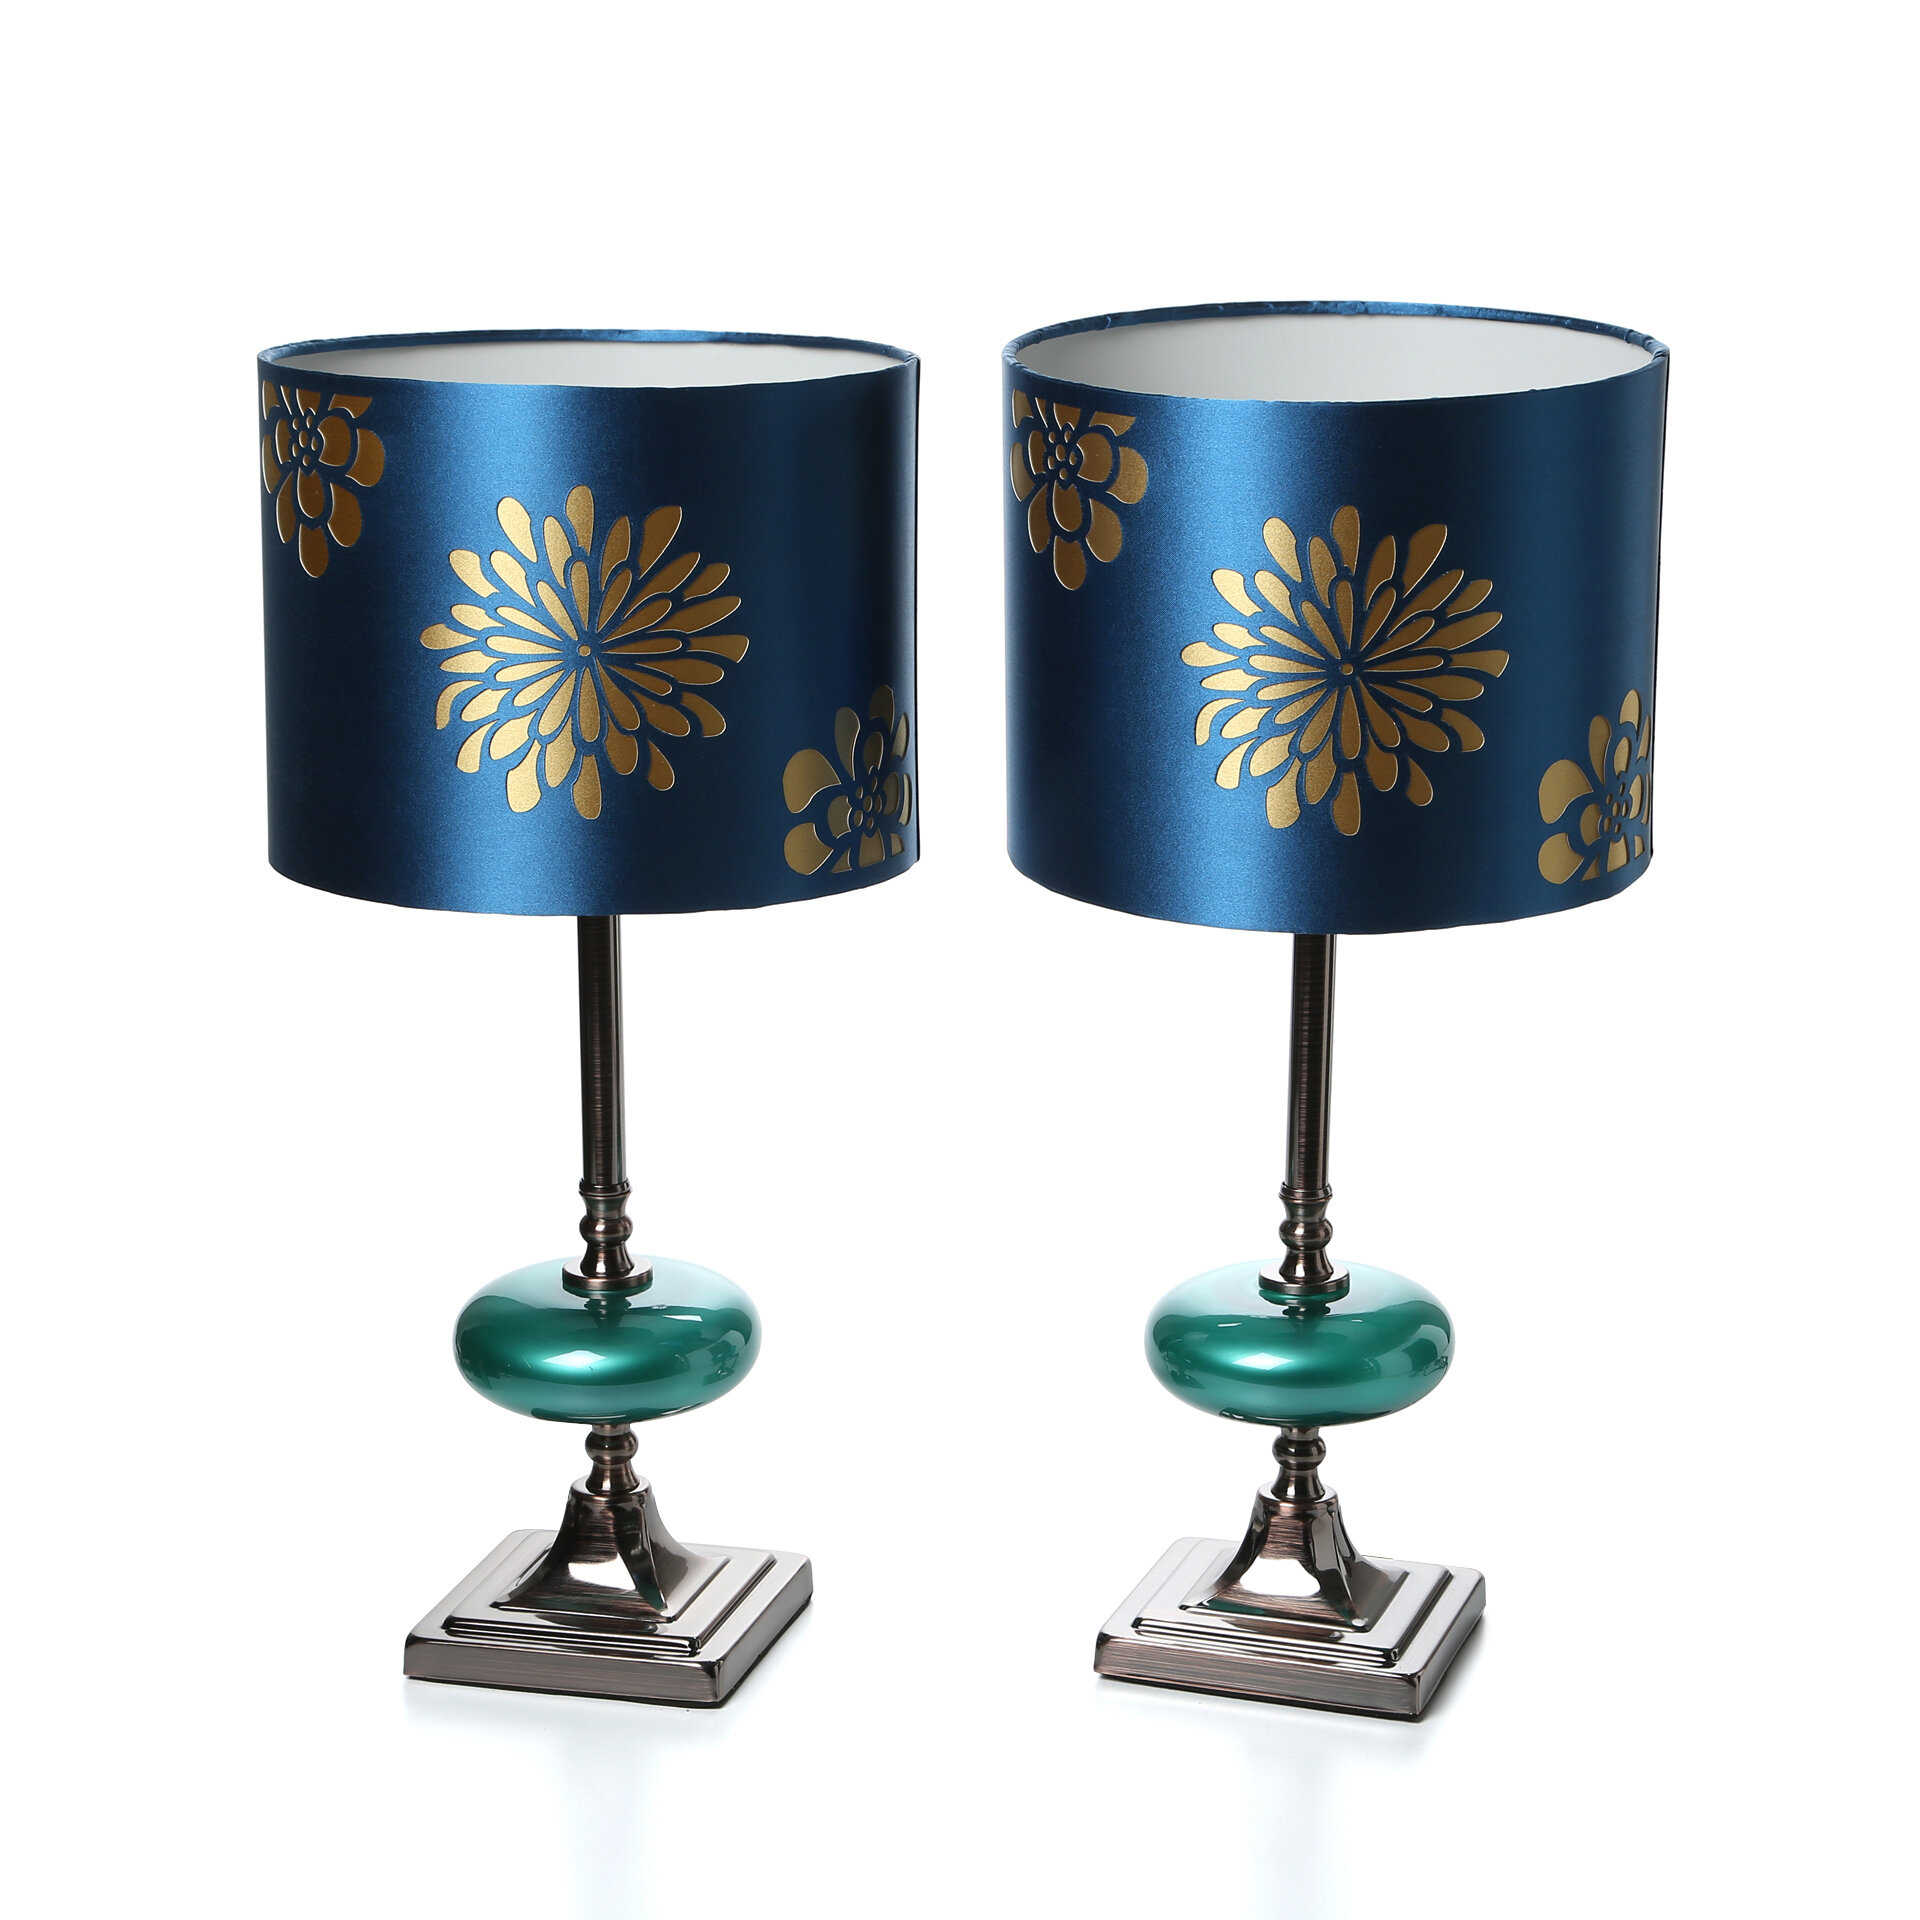 Braxton 19" H Table Lamp with Drum Shade (Set of 2)